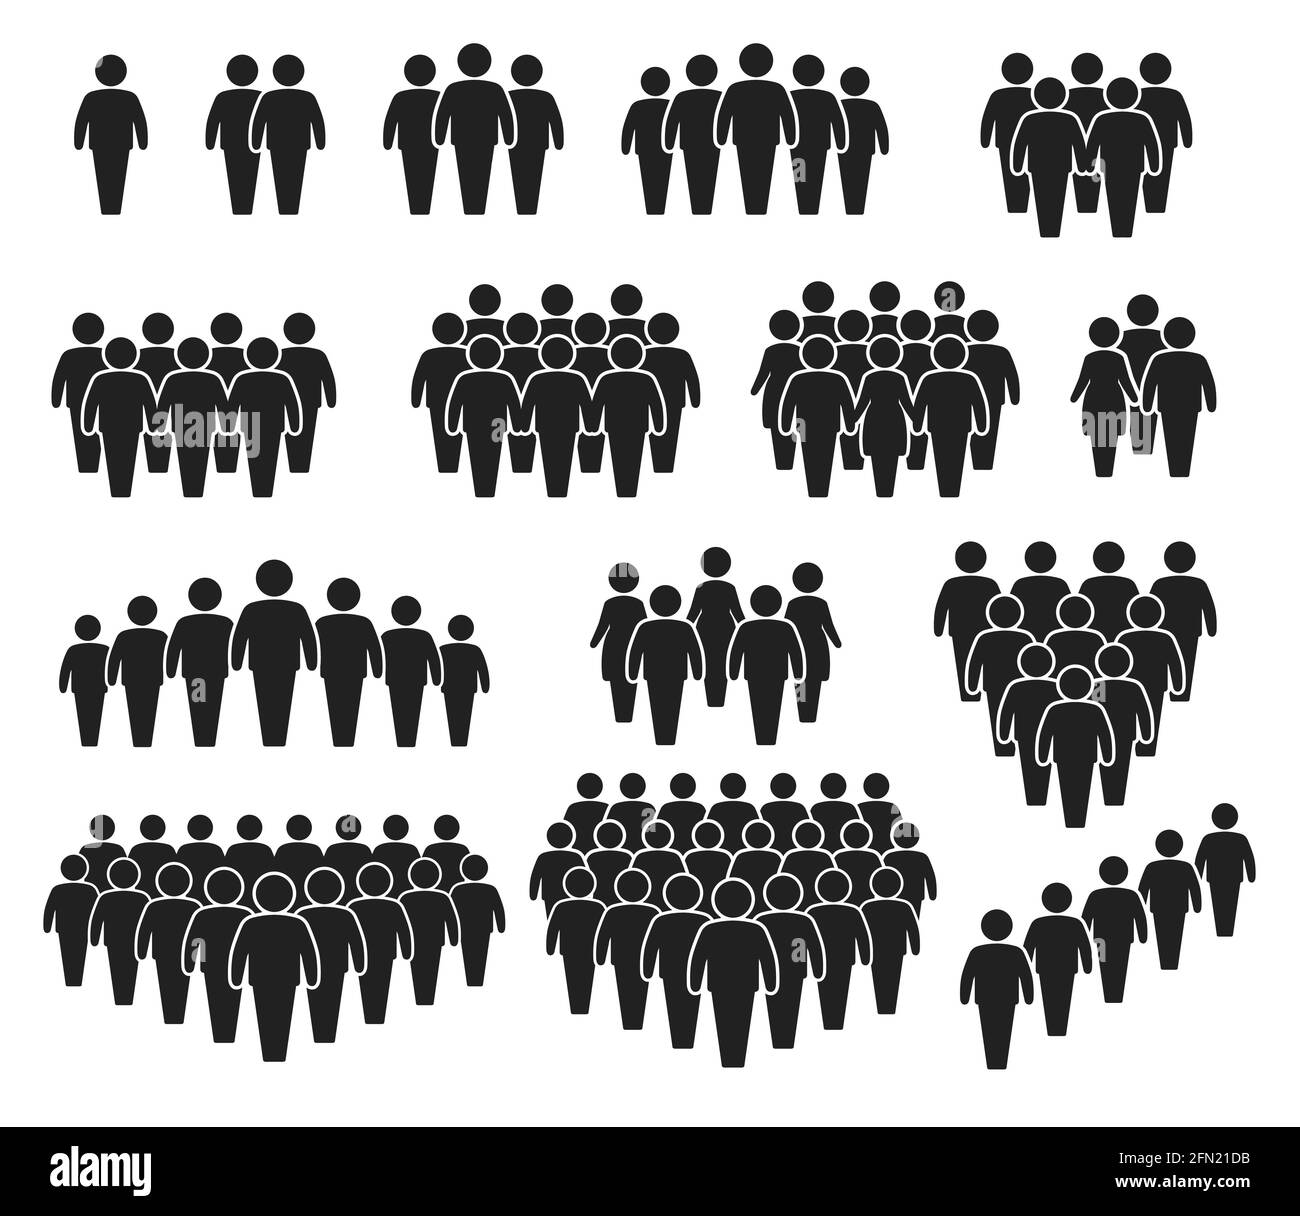 People crowd icons. Large group of people. Team of men or women. People gathering together, standing in queue. Person pictogram icon vector set. User group network, silhouettes for infographic Stock Vector